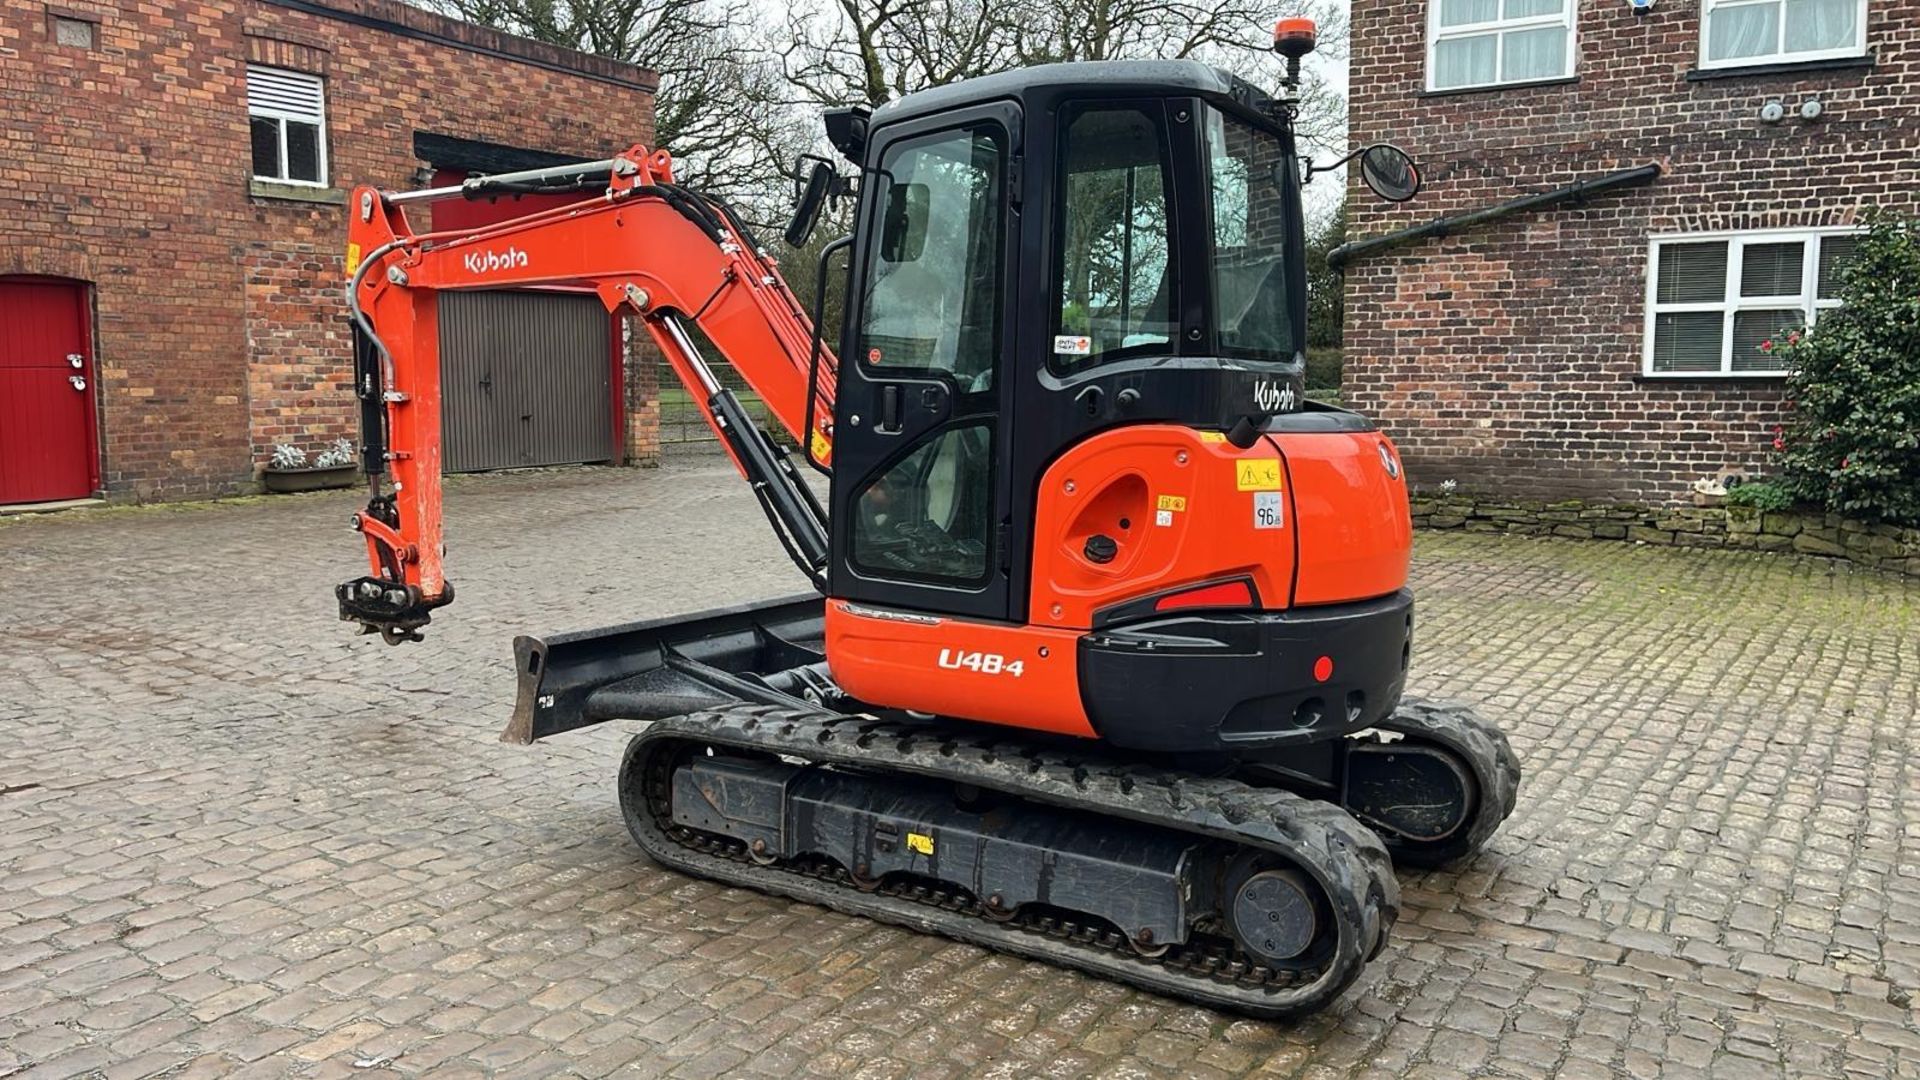 2019 KUBOTA U48-4 COMPACT EXCAVATOR 552 HOURS WITH HYDRAULIC QUICK HITCH TO BE SOLD WITH 4 BUCKETS - Image 2 of 24